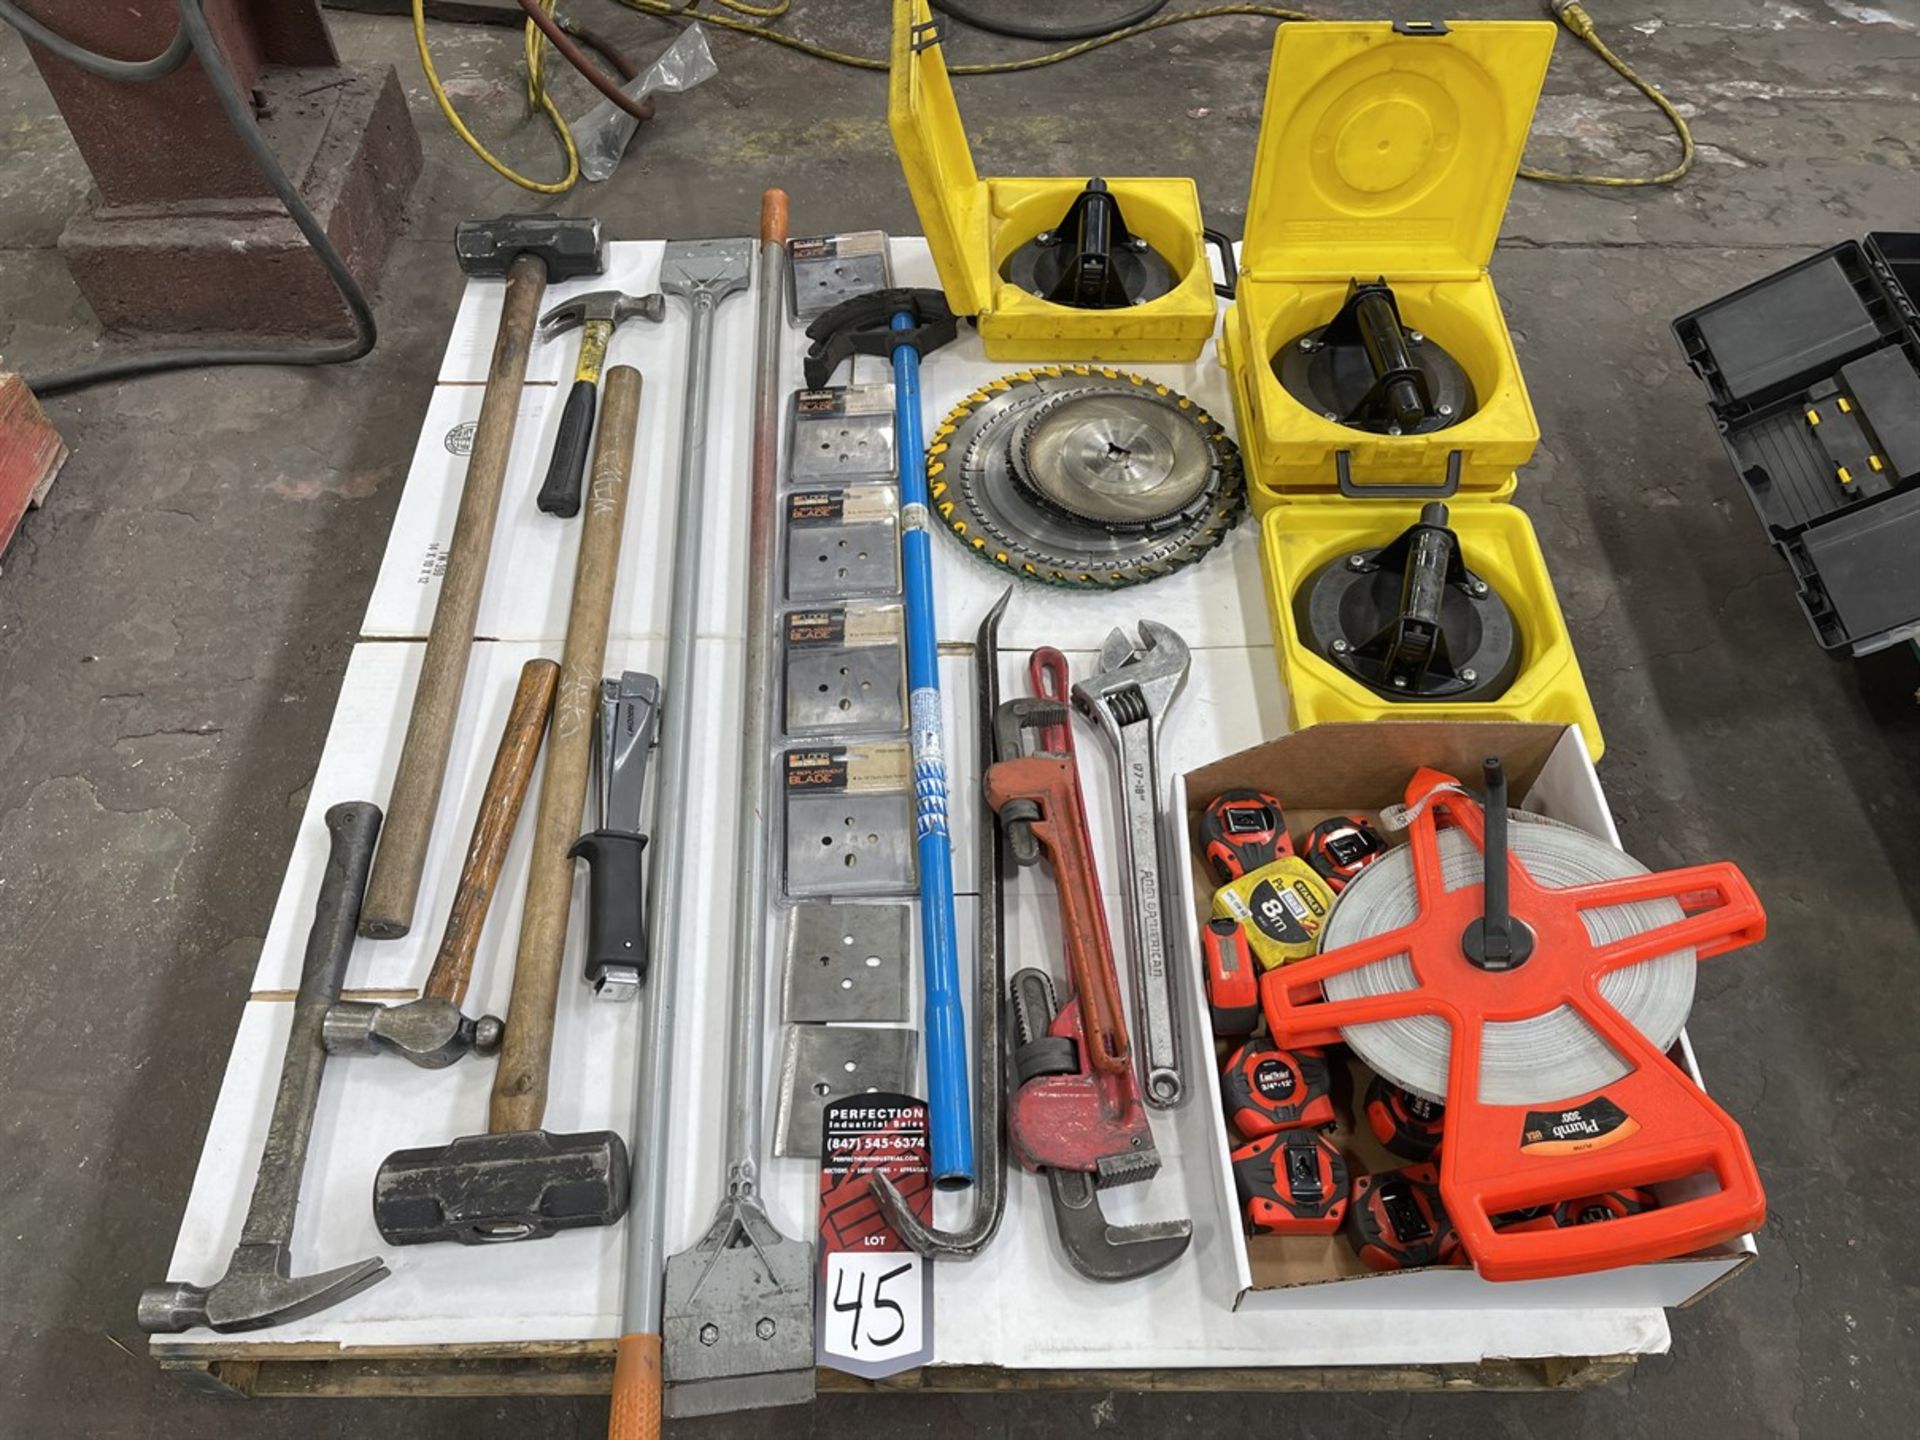 Lot Comprising Hammers, Scrapers, Suction Cups, Tube Bender, Pipe Wrenches and Tape Measures